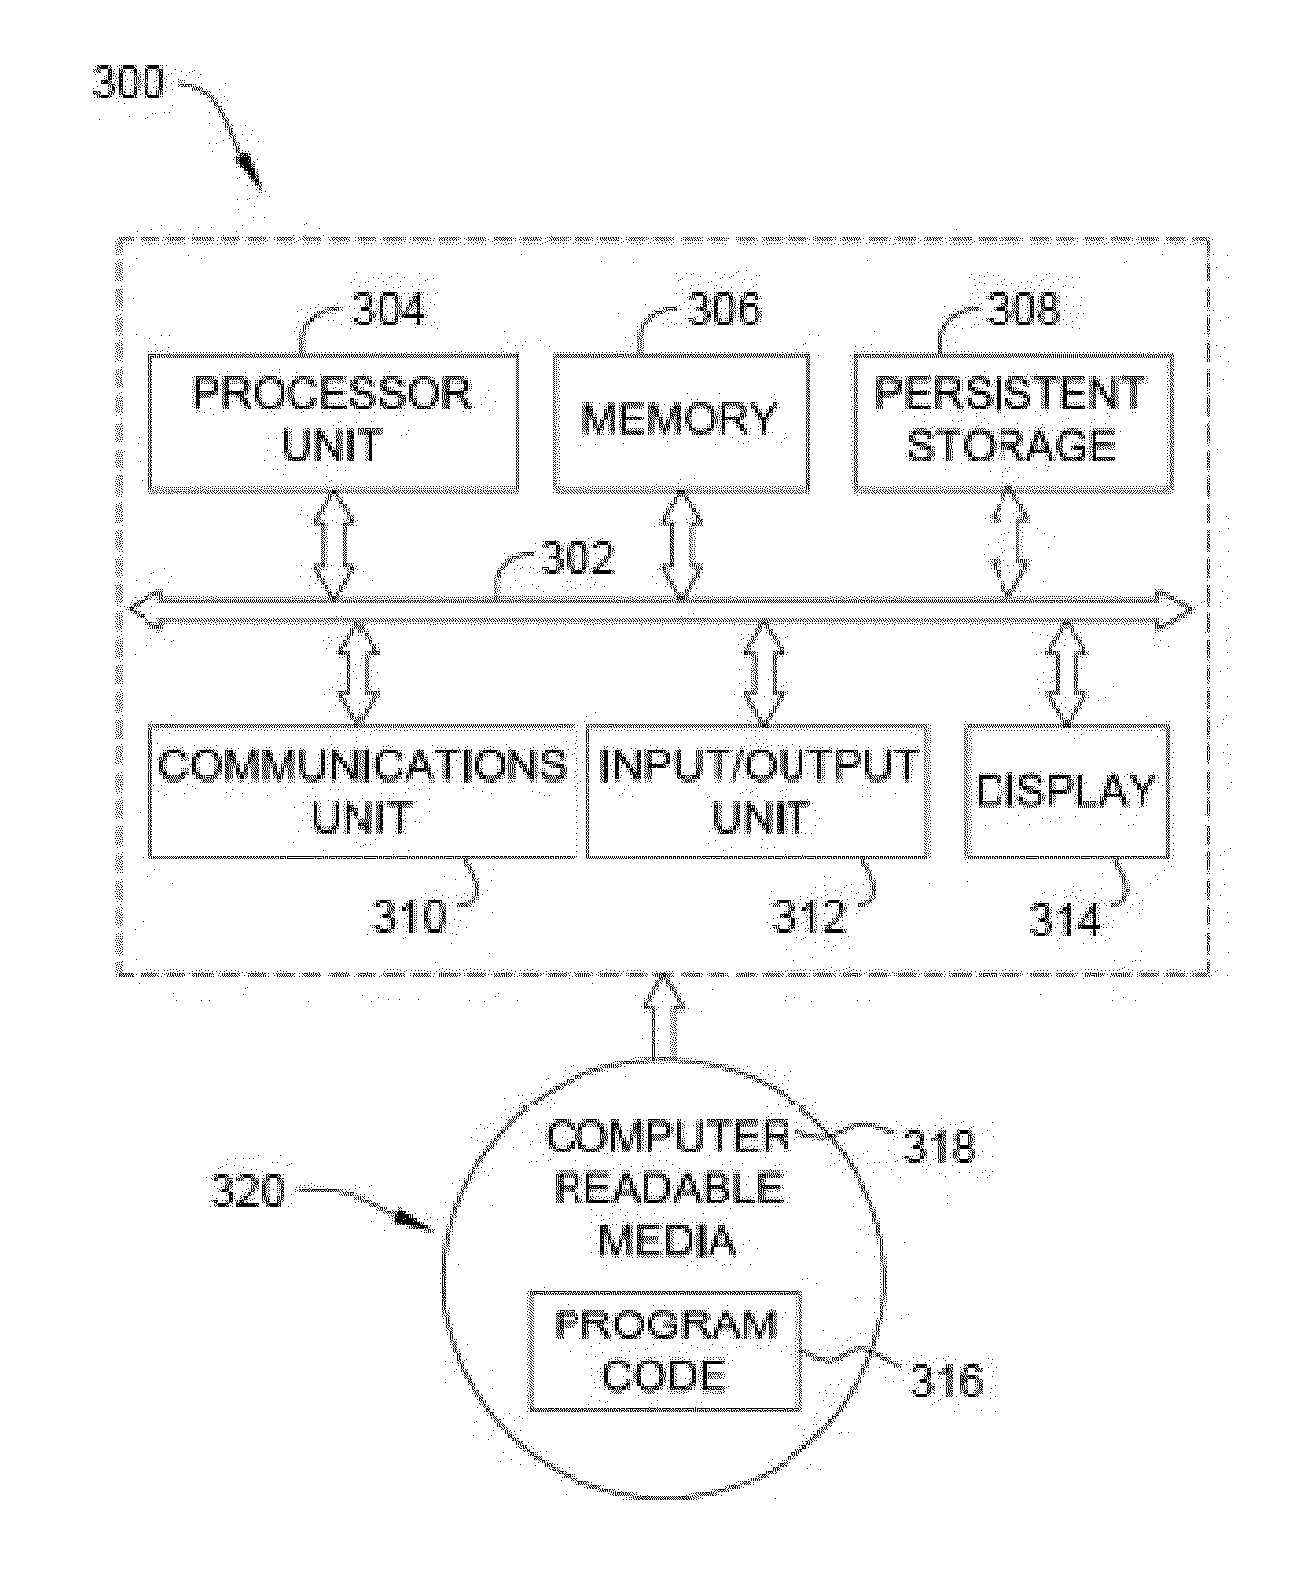 Methods and systems for calibrating irradiance sensors